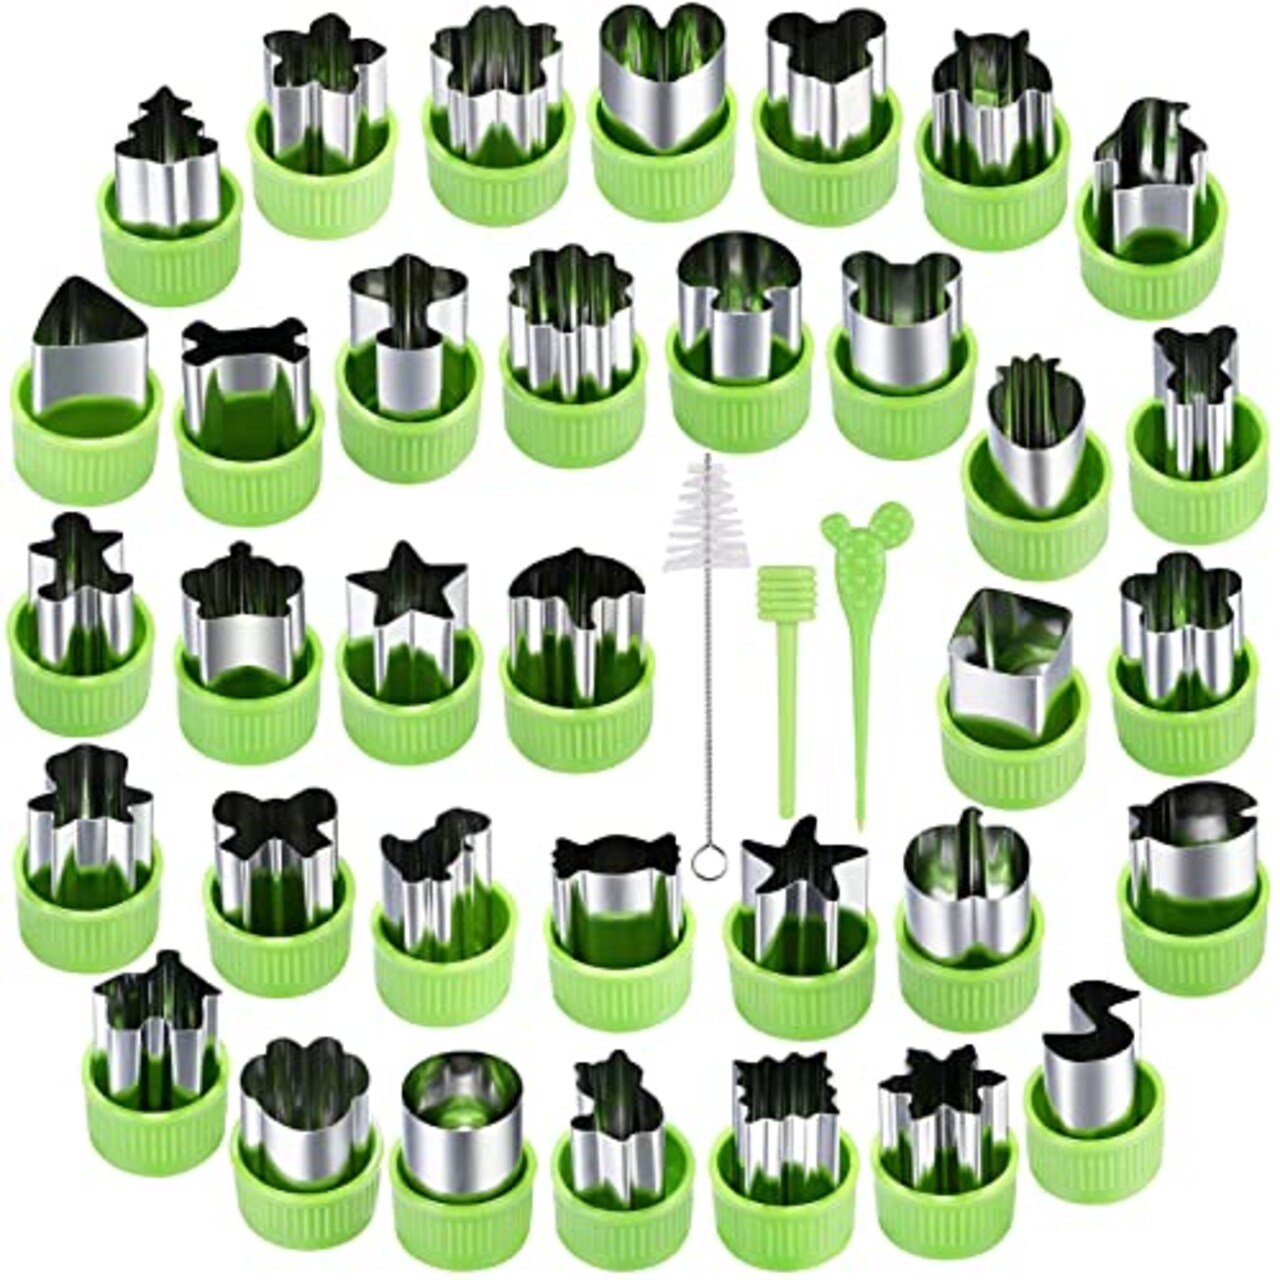 NEW LIVE 35 Pack Cookie Cutters Vegetable Fruit Cutter Shapes